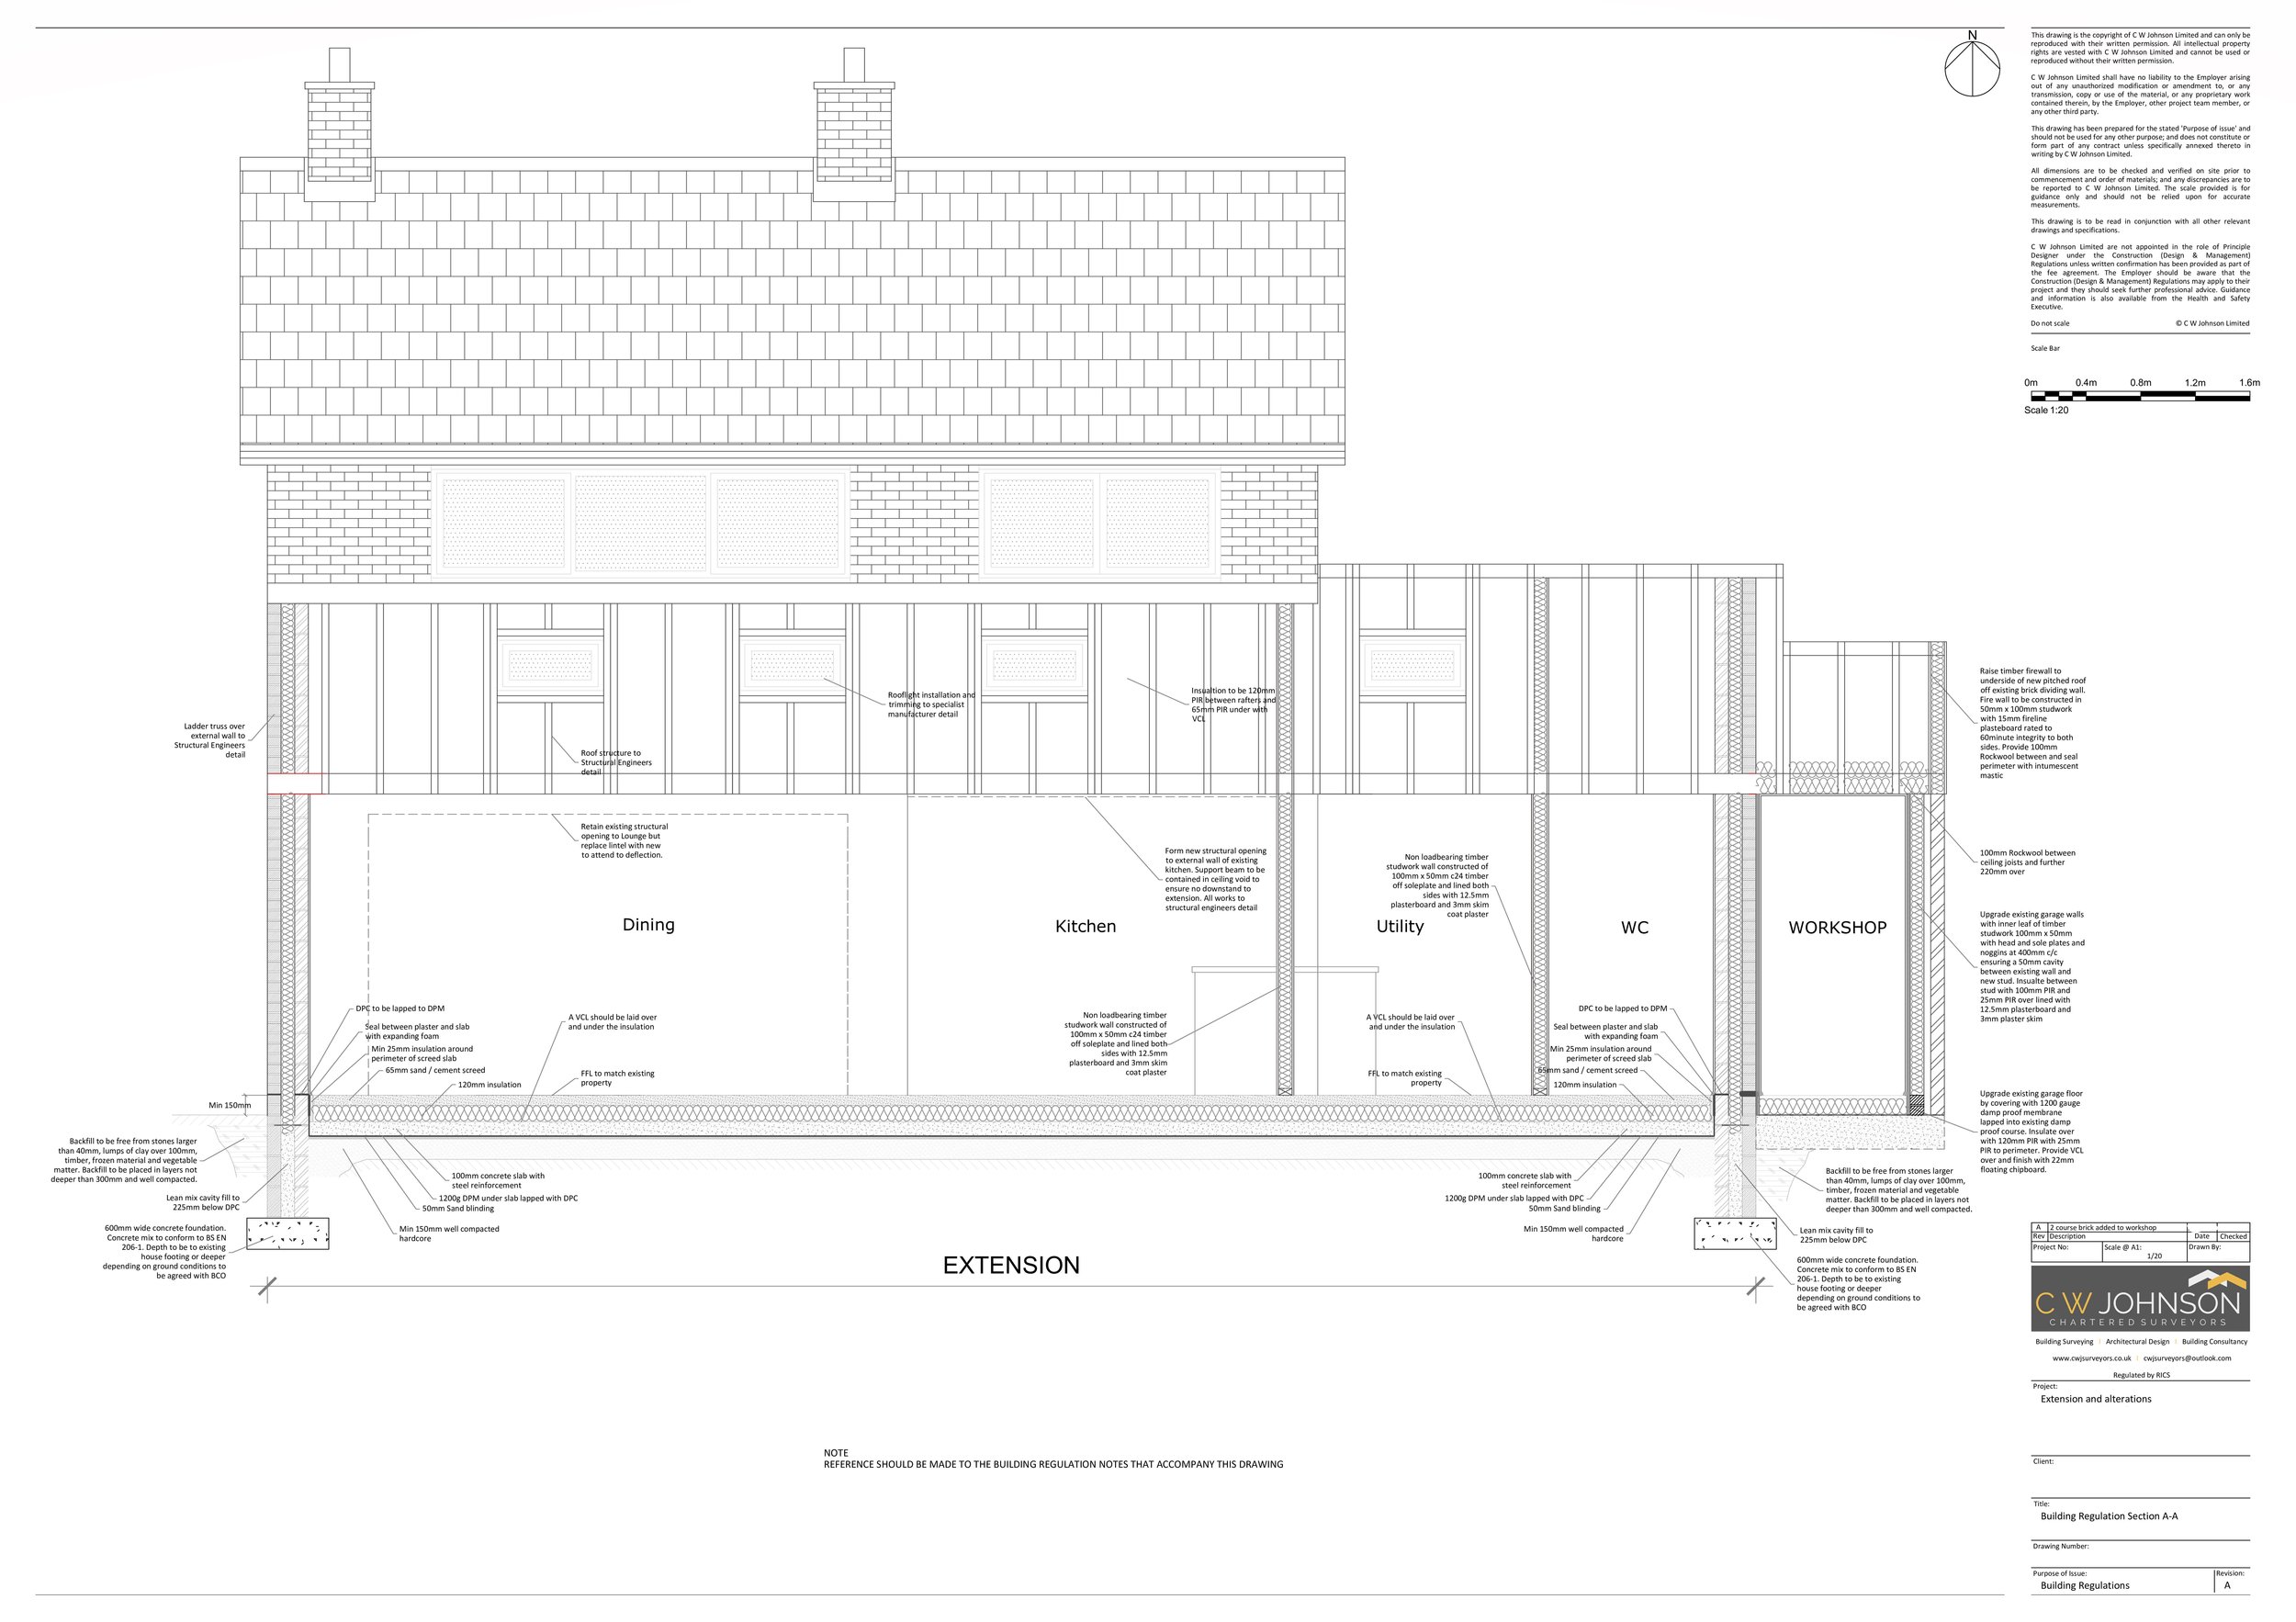 2020197 - 04 Rev A Building Regs Section A-A.jpg